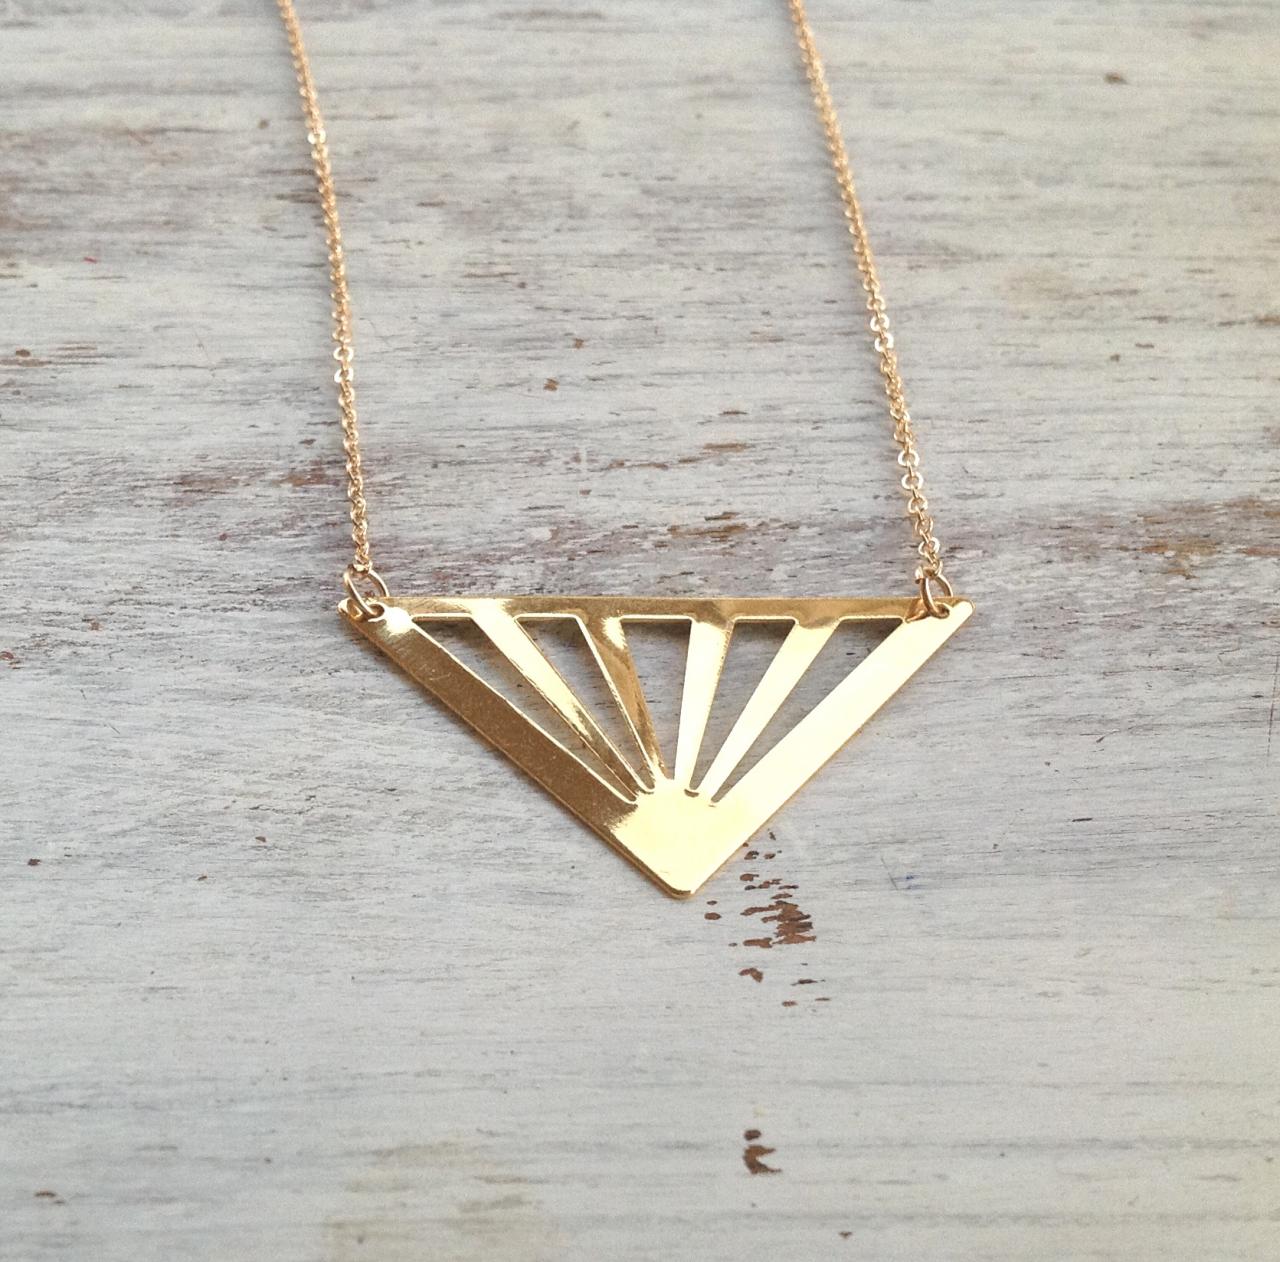 Gold necklace, geometric necklace, triangle necklace,statement necklace, geometric gold necklace 3011